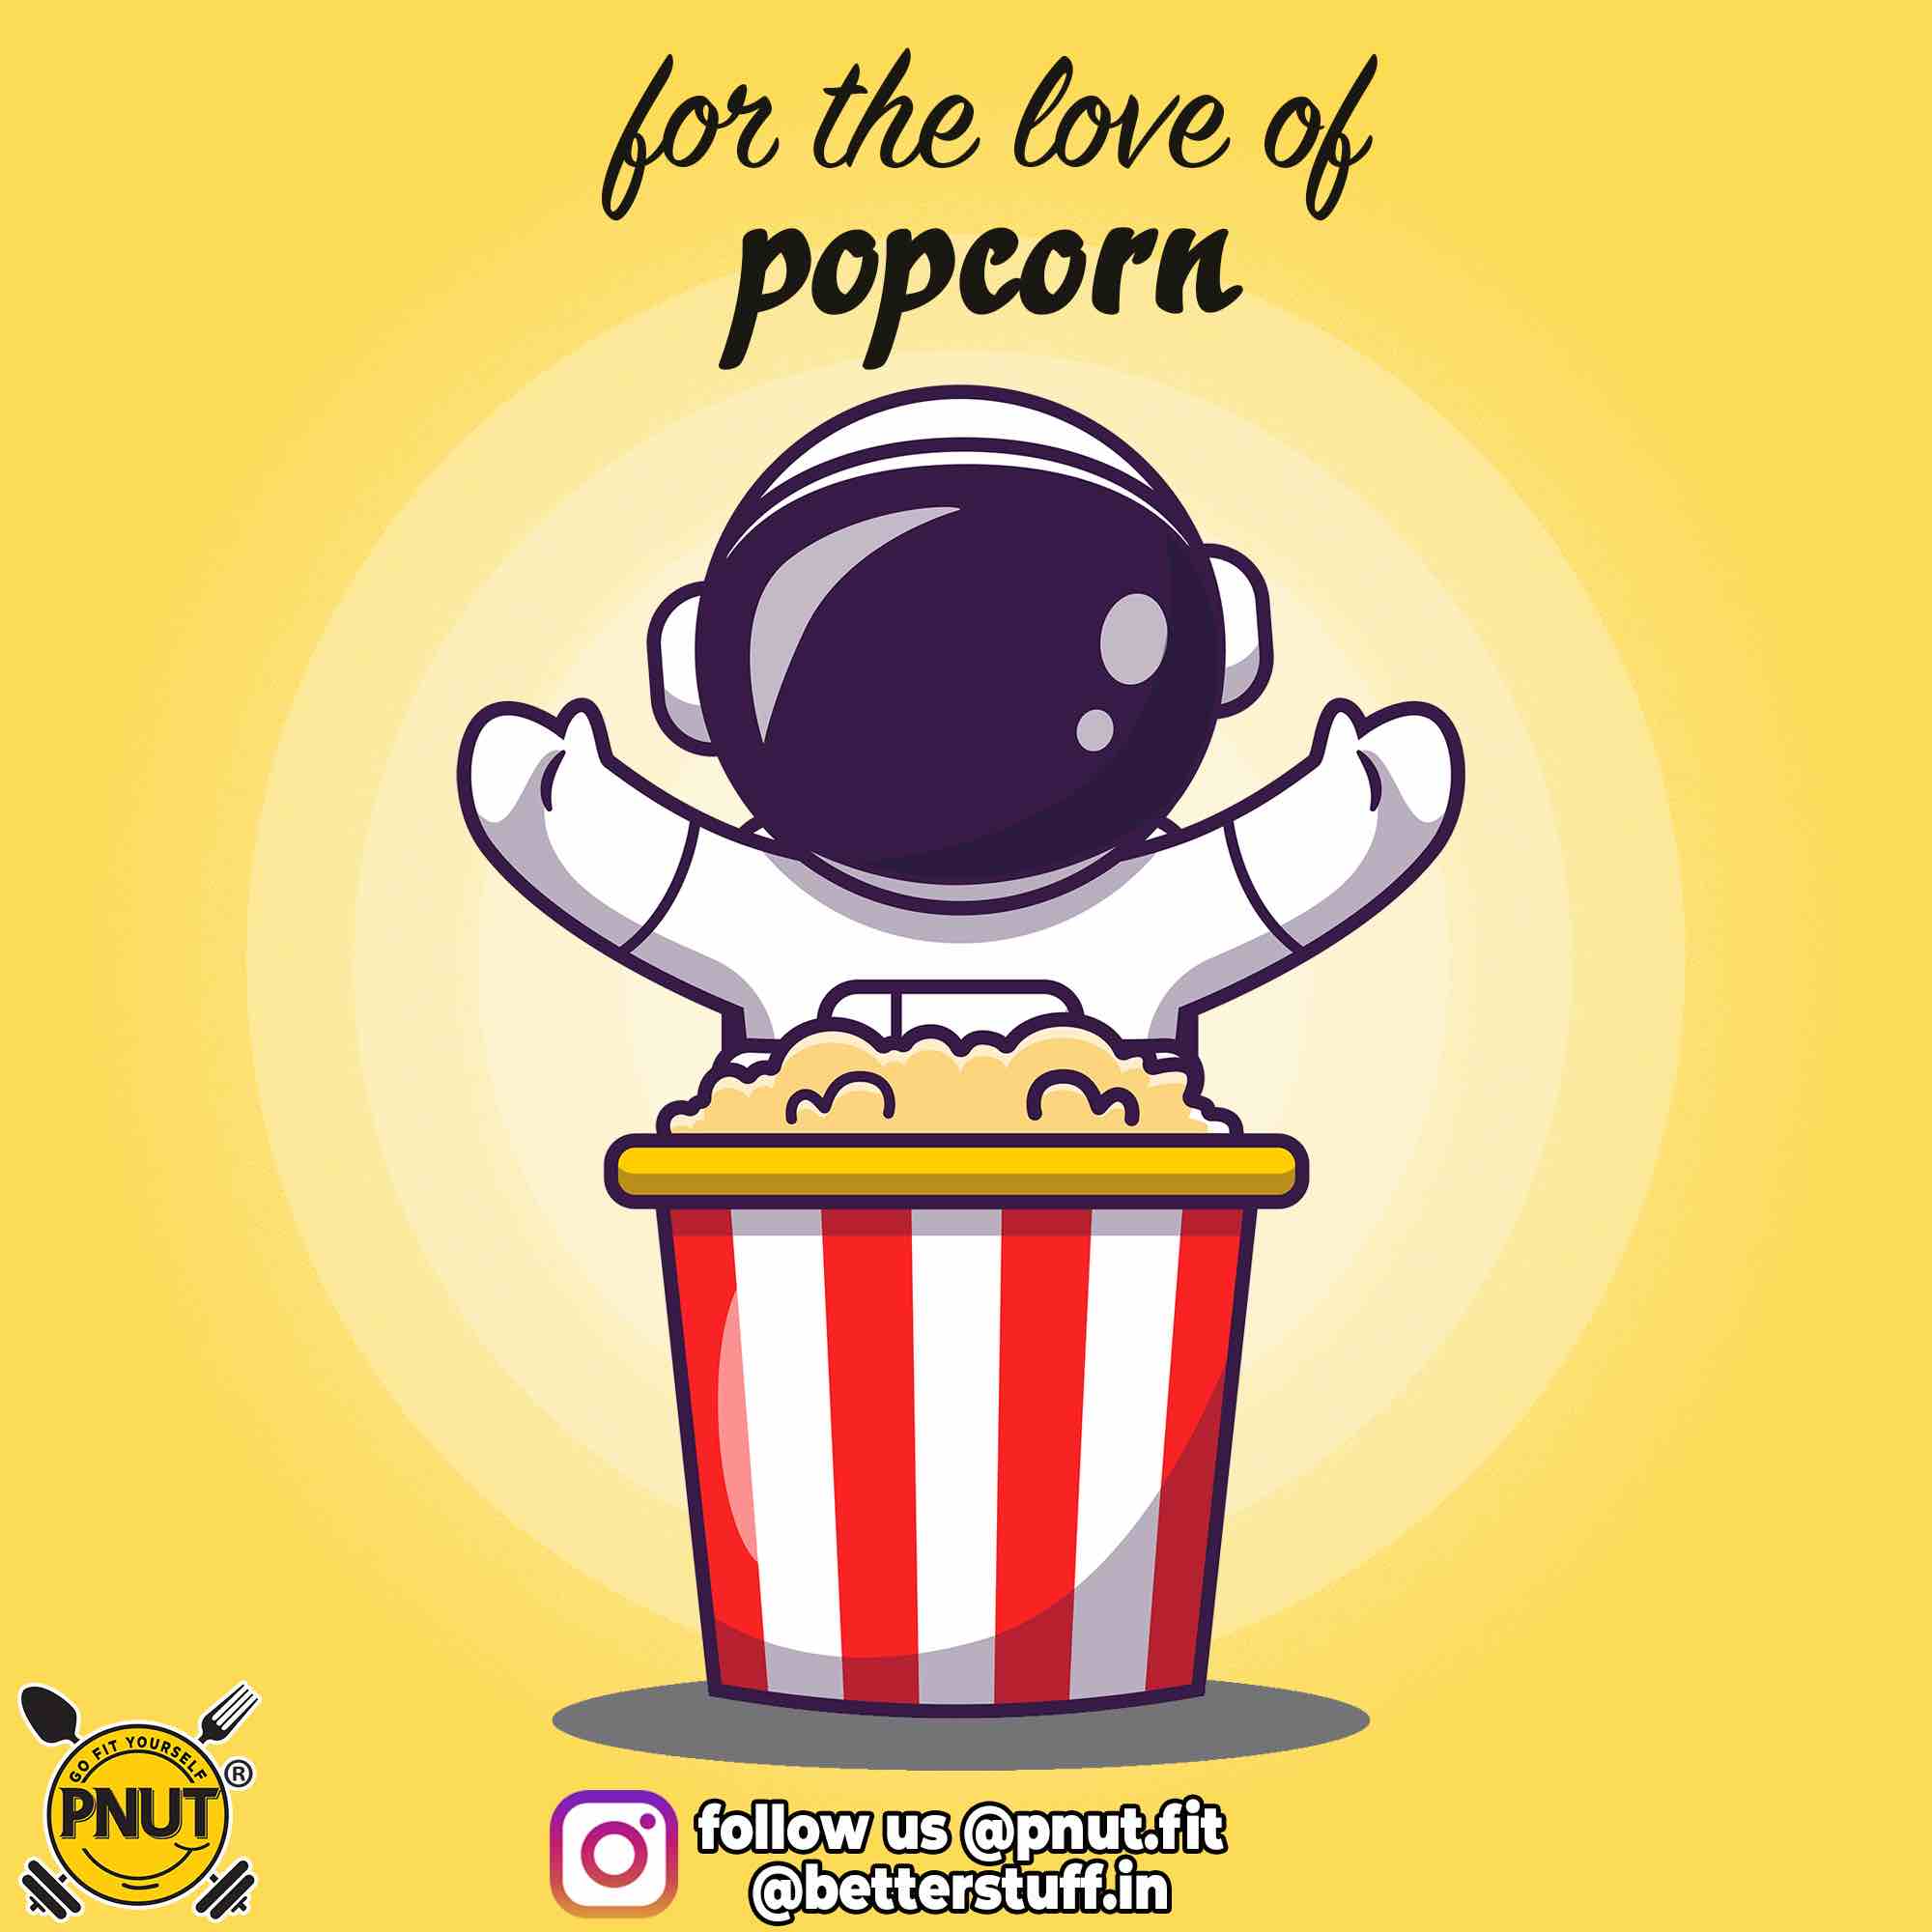 For the love of popcorn (read below)